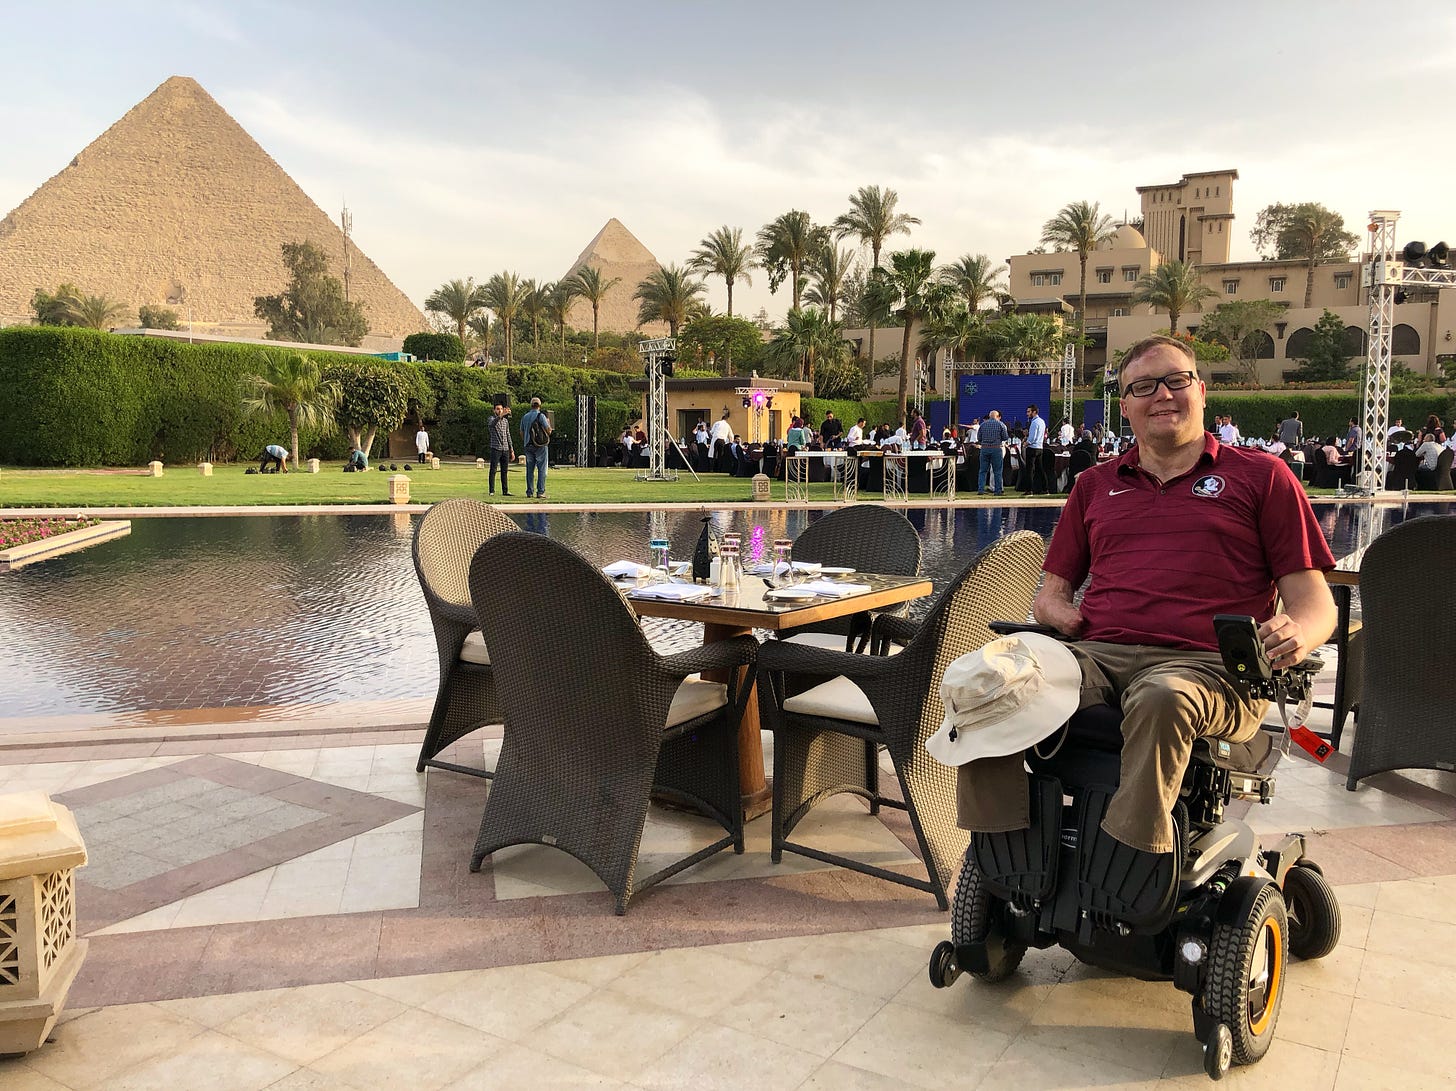 John seated in his power wheelchair at an outdoor table in front of an Egyptian pyramid.